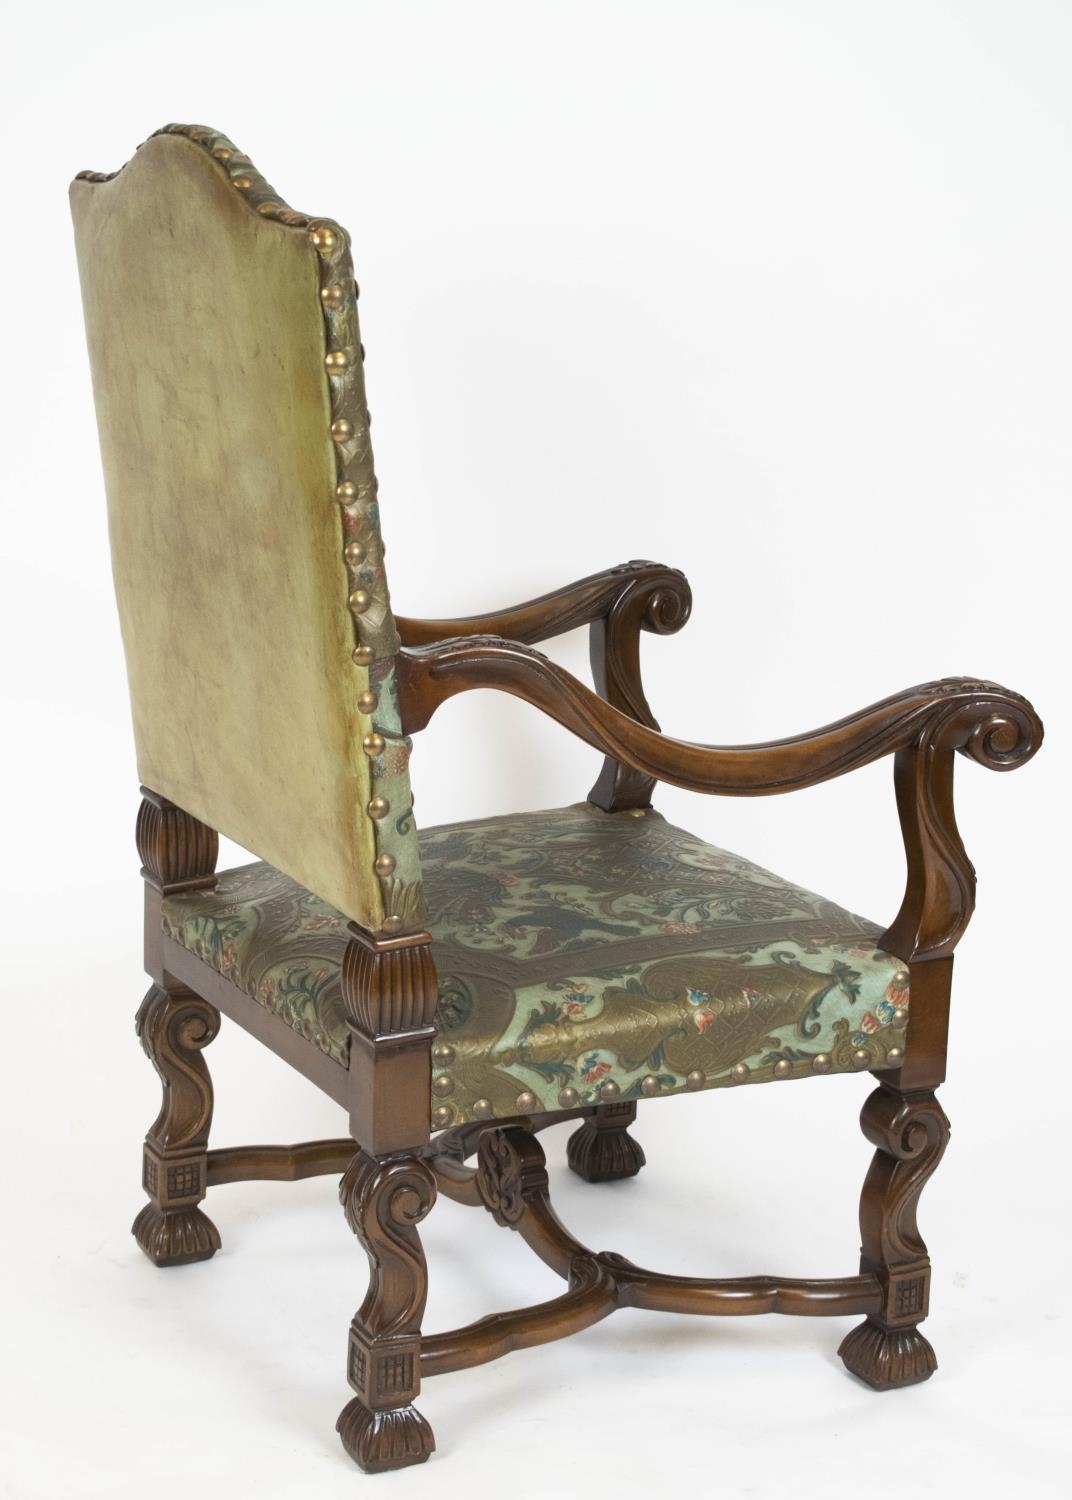 THRONE CHAIR, 121cm H x 72cm W x 70cm D, Louis XIV style in polychrome embossed leather. - Image 5 of 5